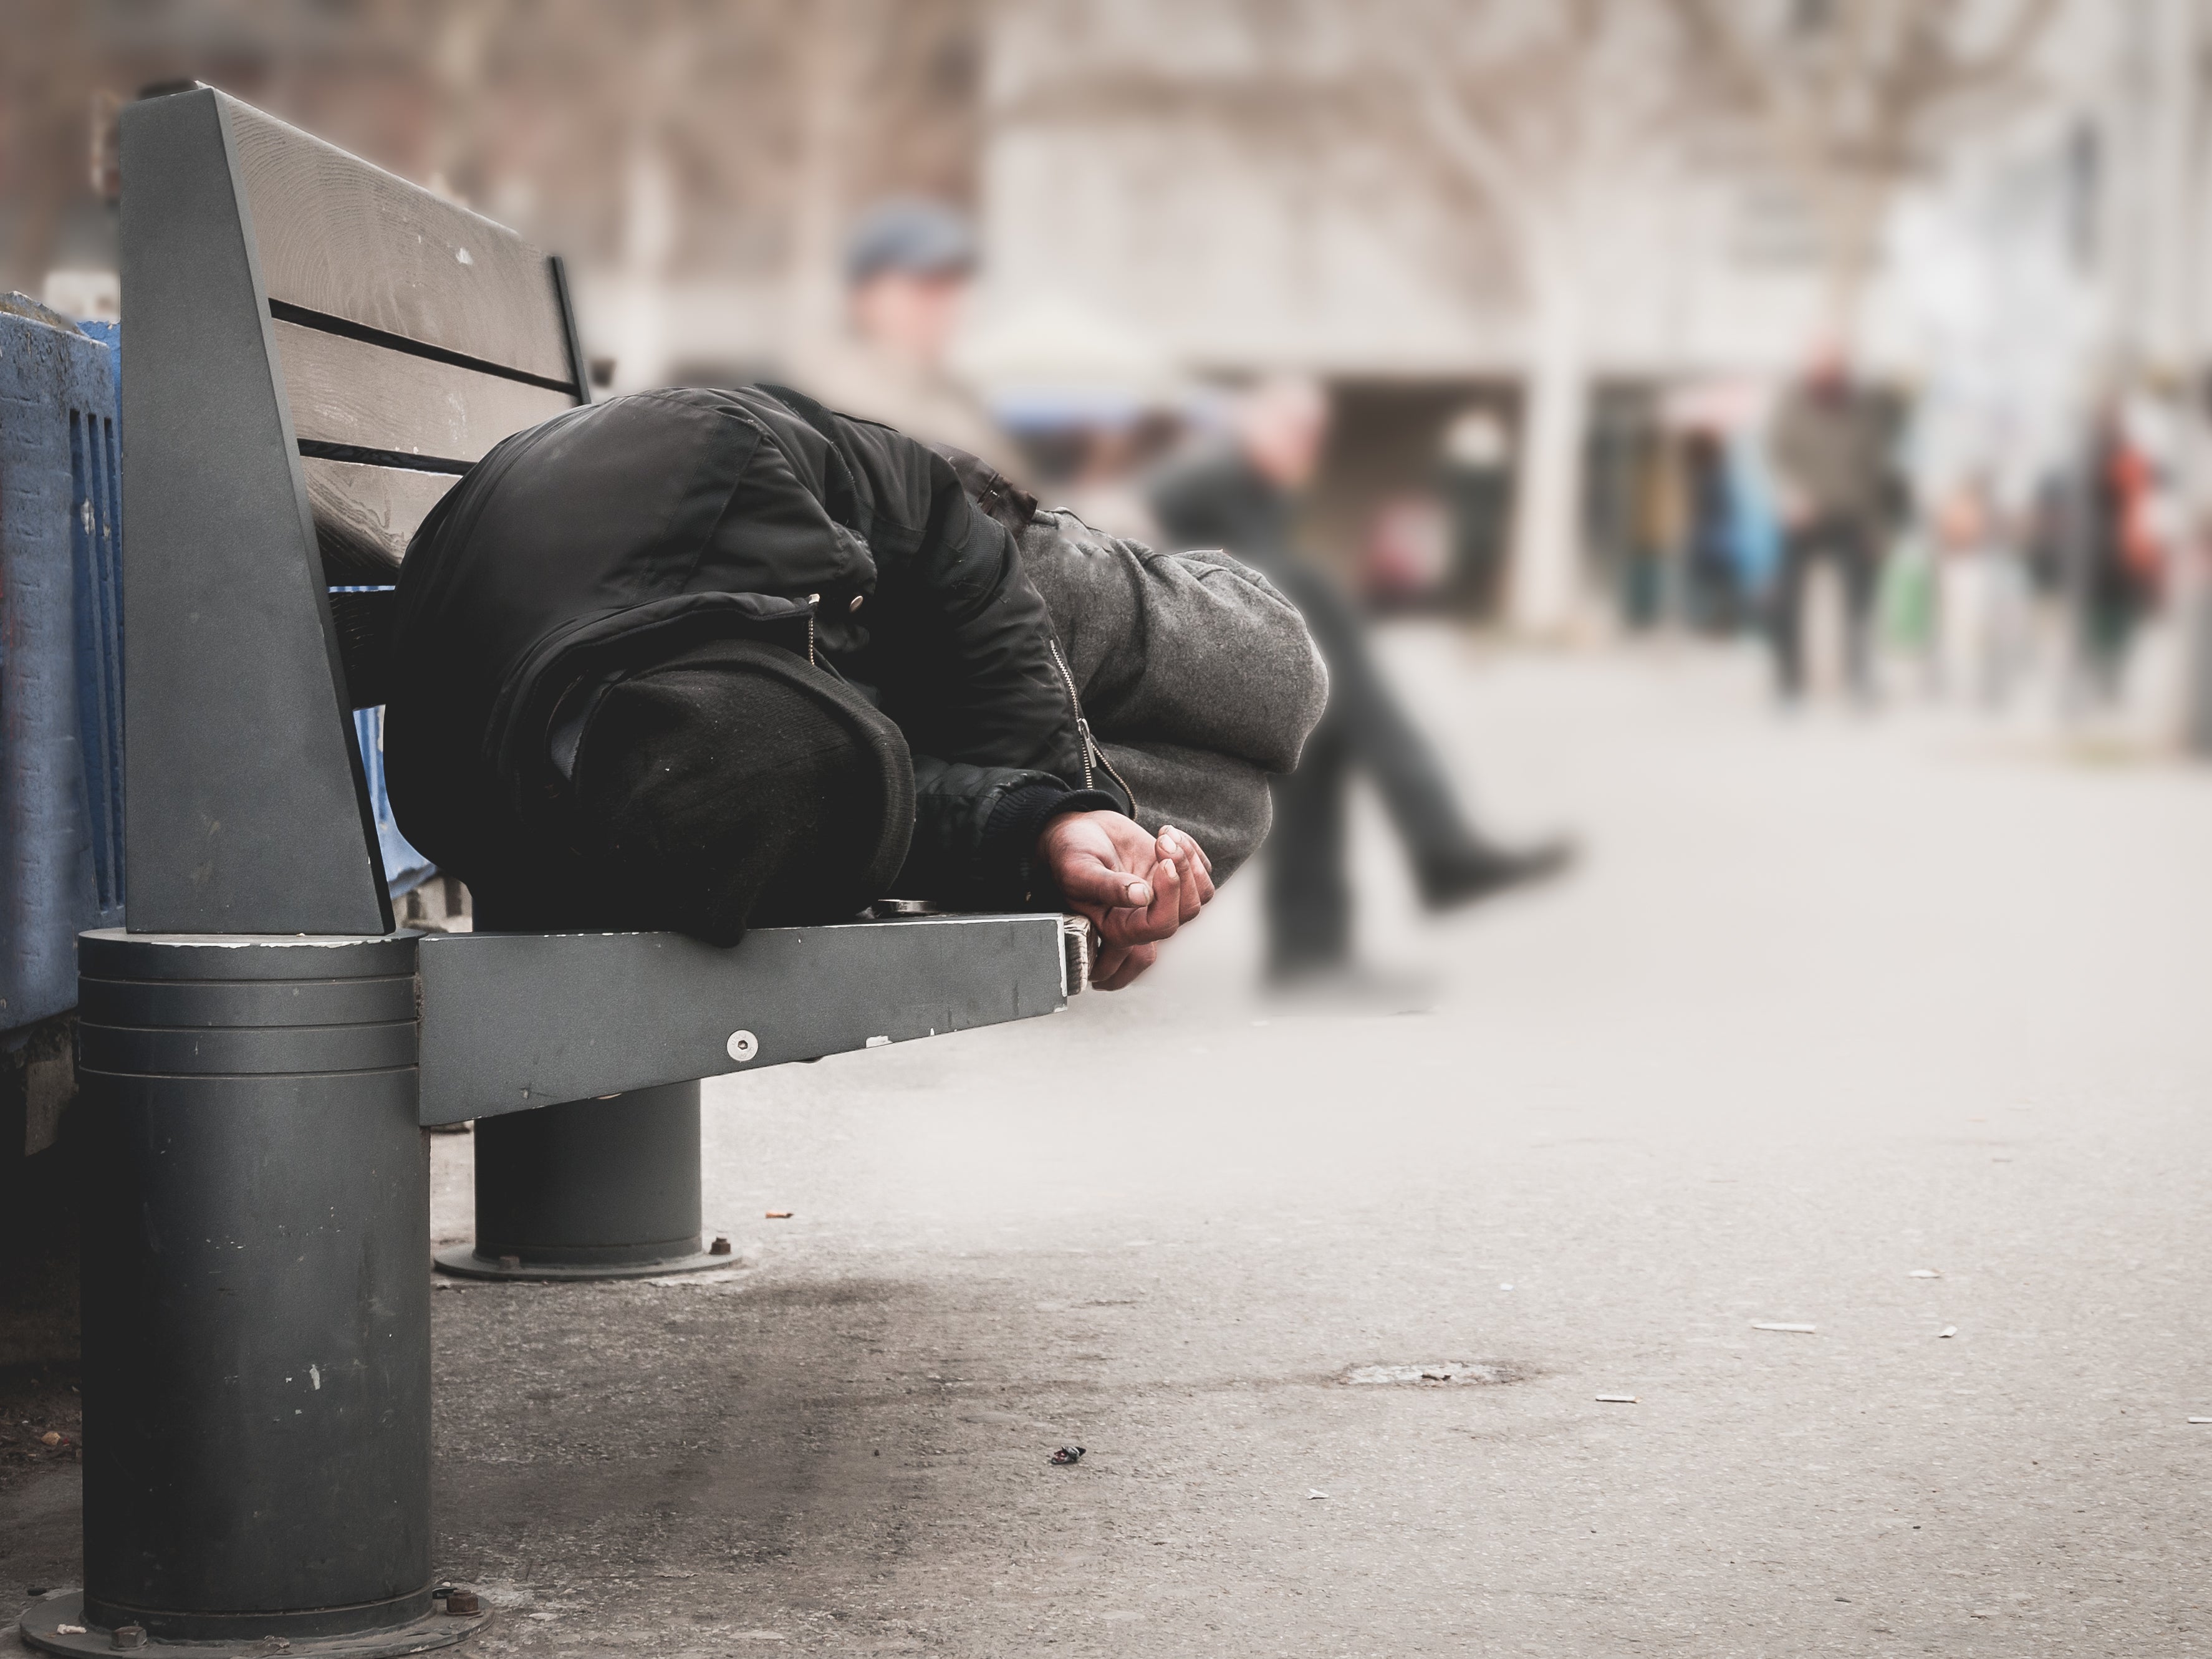 Thousands of people housed during the coronavirus pandemic are at risk of becoming trapped in a cycle of homelessness, Crisis has warned.